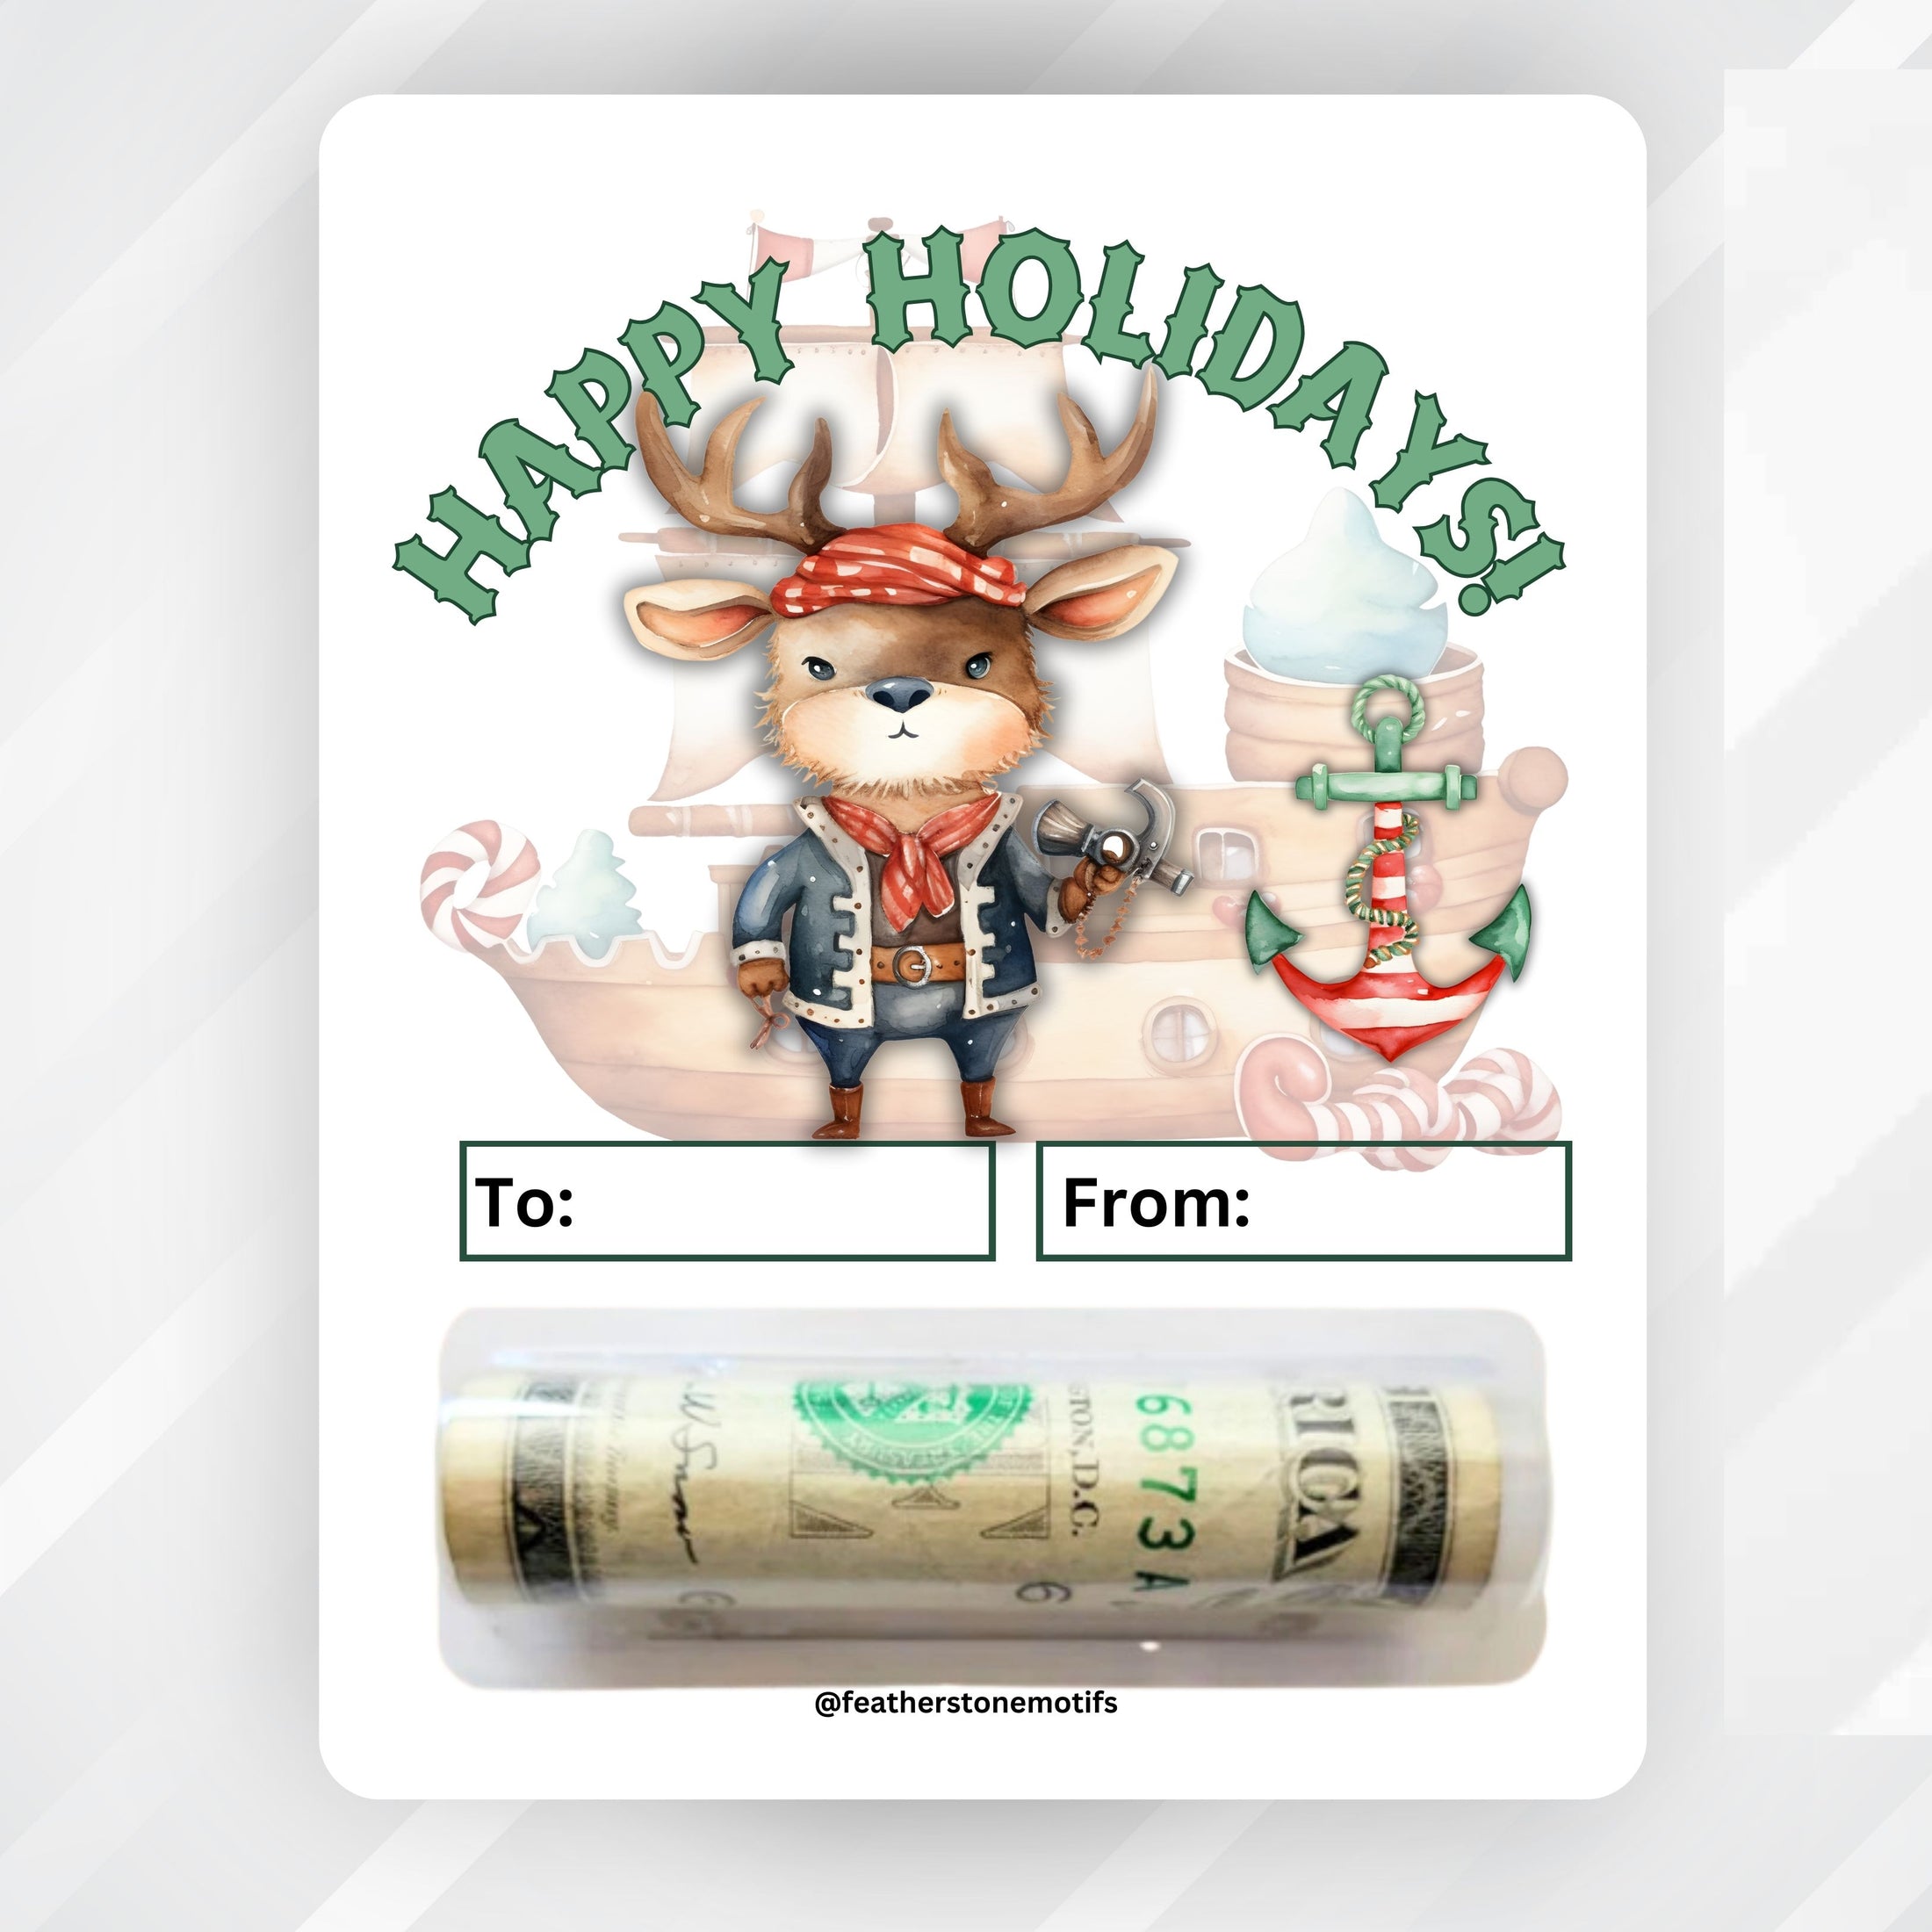 This image shows the Holiday Pirate money card with money tube attached.